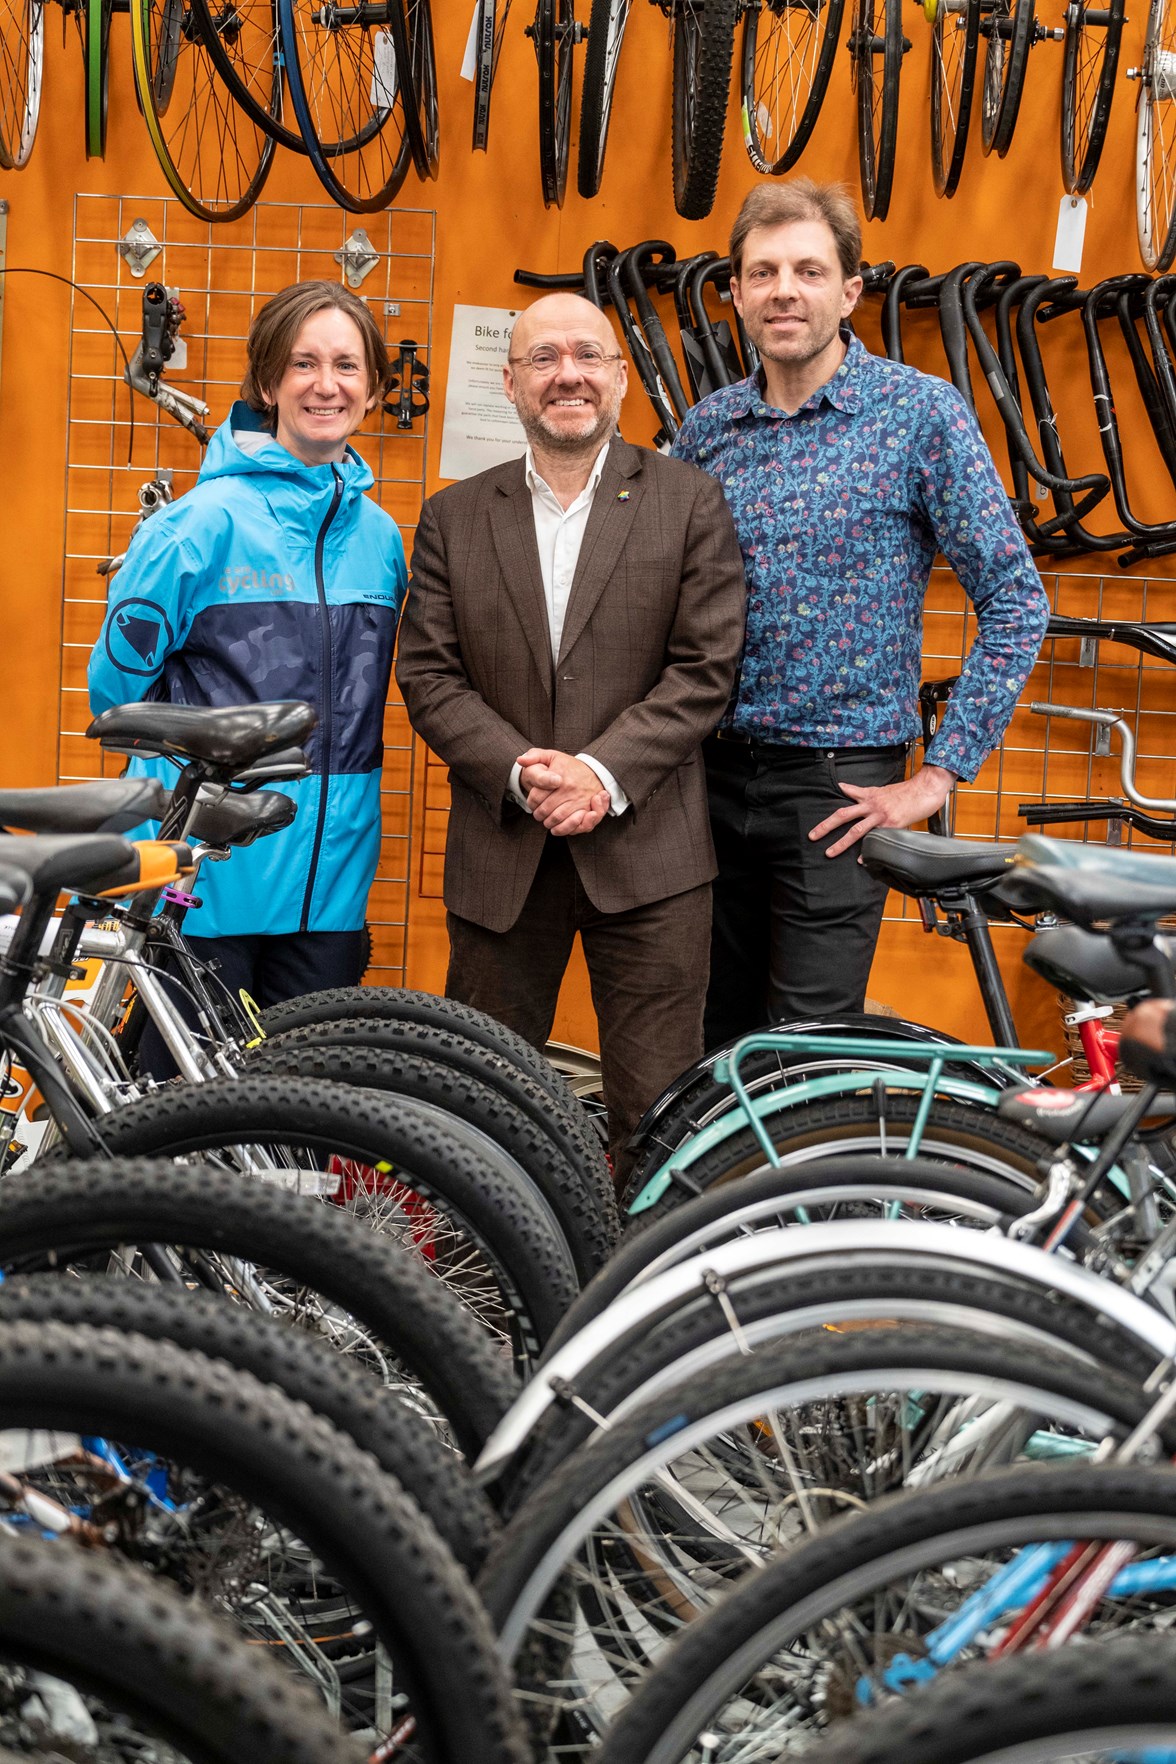 Greg from Bike for Good, Suzanne for Cycling UK and Patrick Harvie, Minister for Active Travel